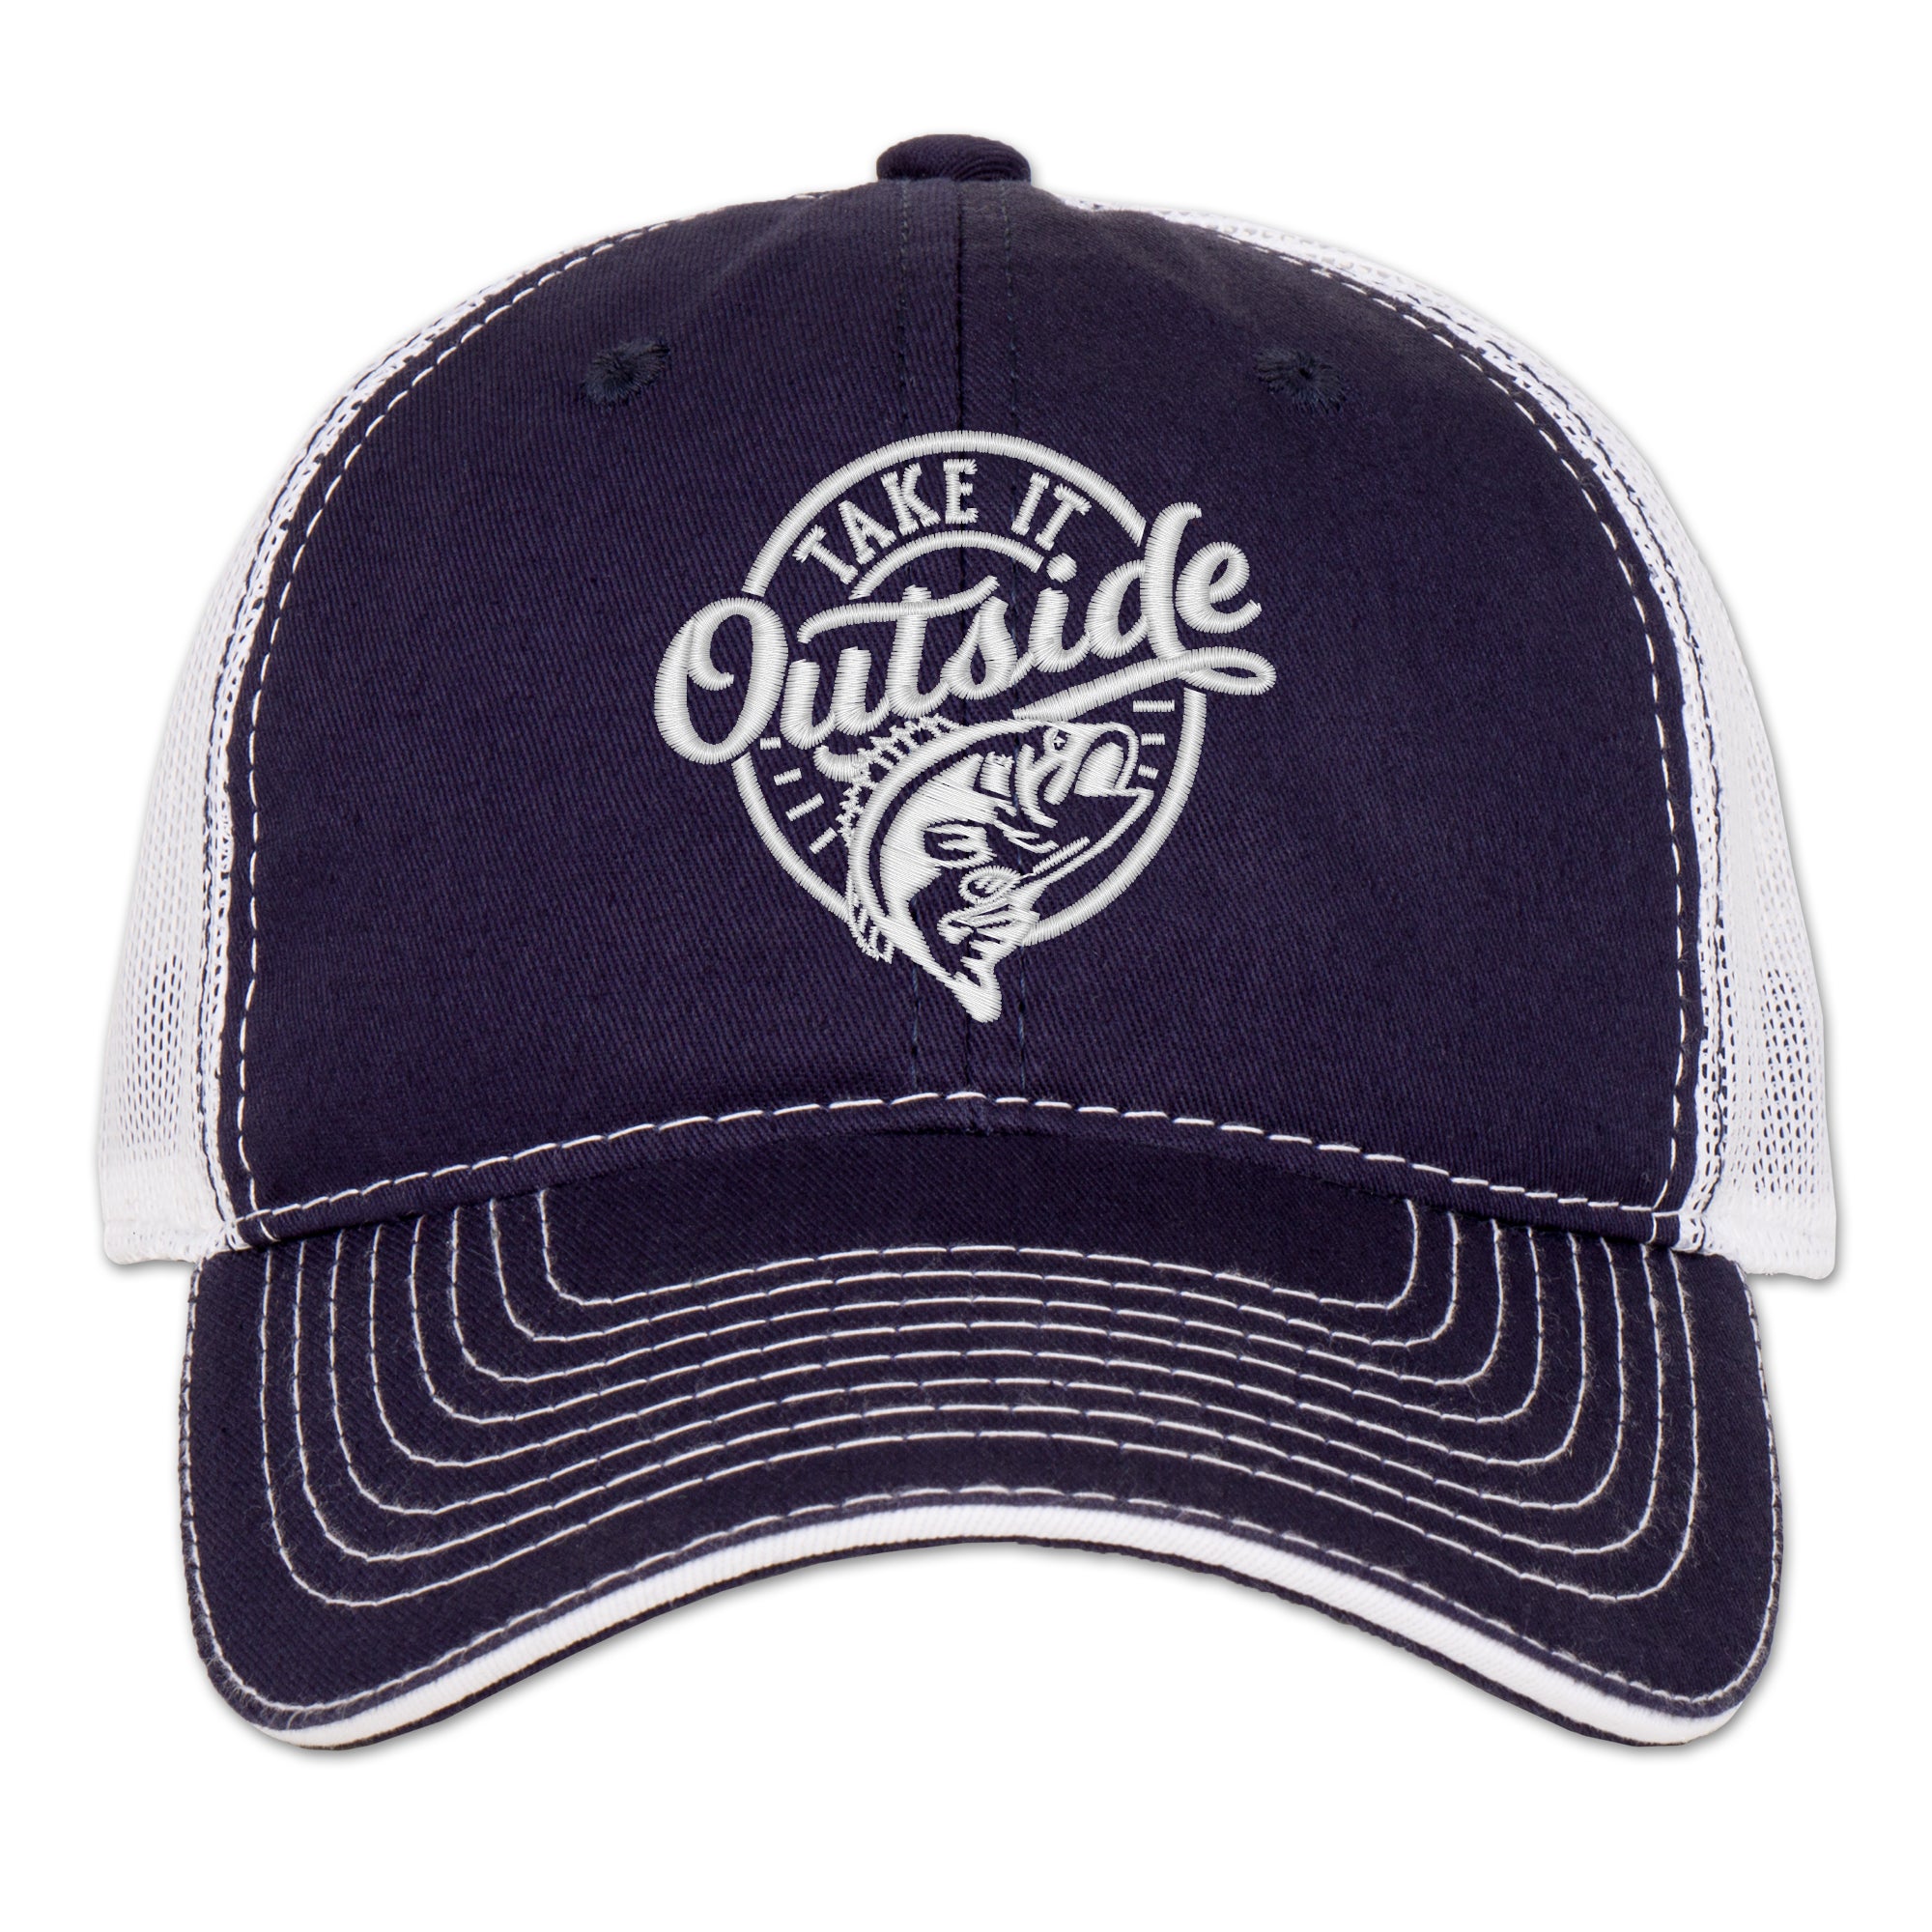 Earth Sun Moon Take It Outside: Fish Embroidered Trucker Hat - Navy/White - Adjustable